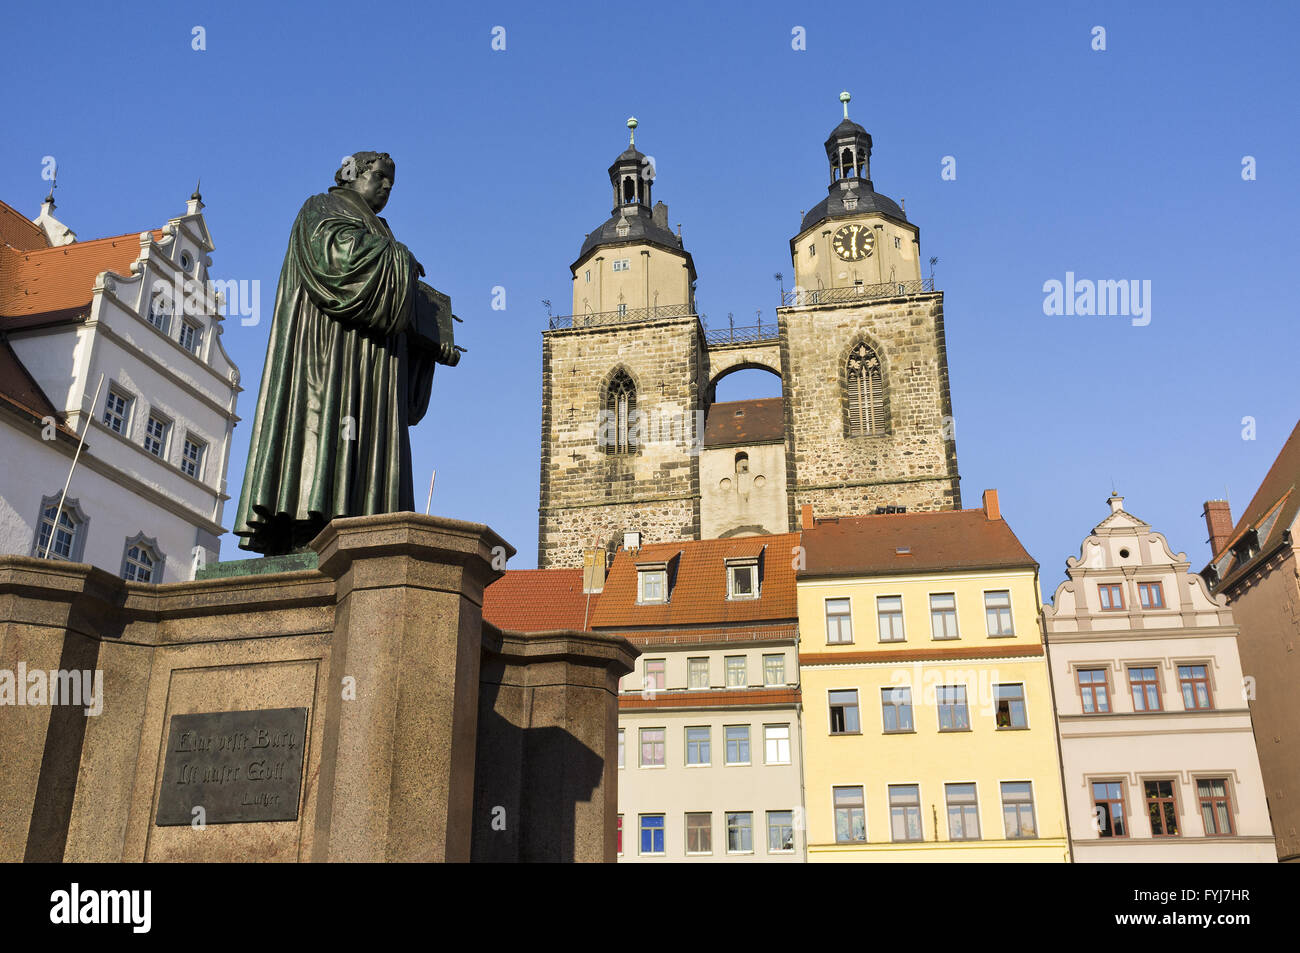 Luther monument, Lutherstadt Wittenberg, Germany Stock Photo